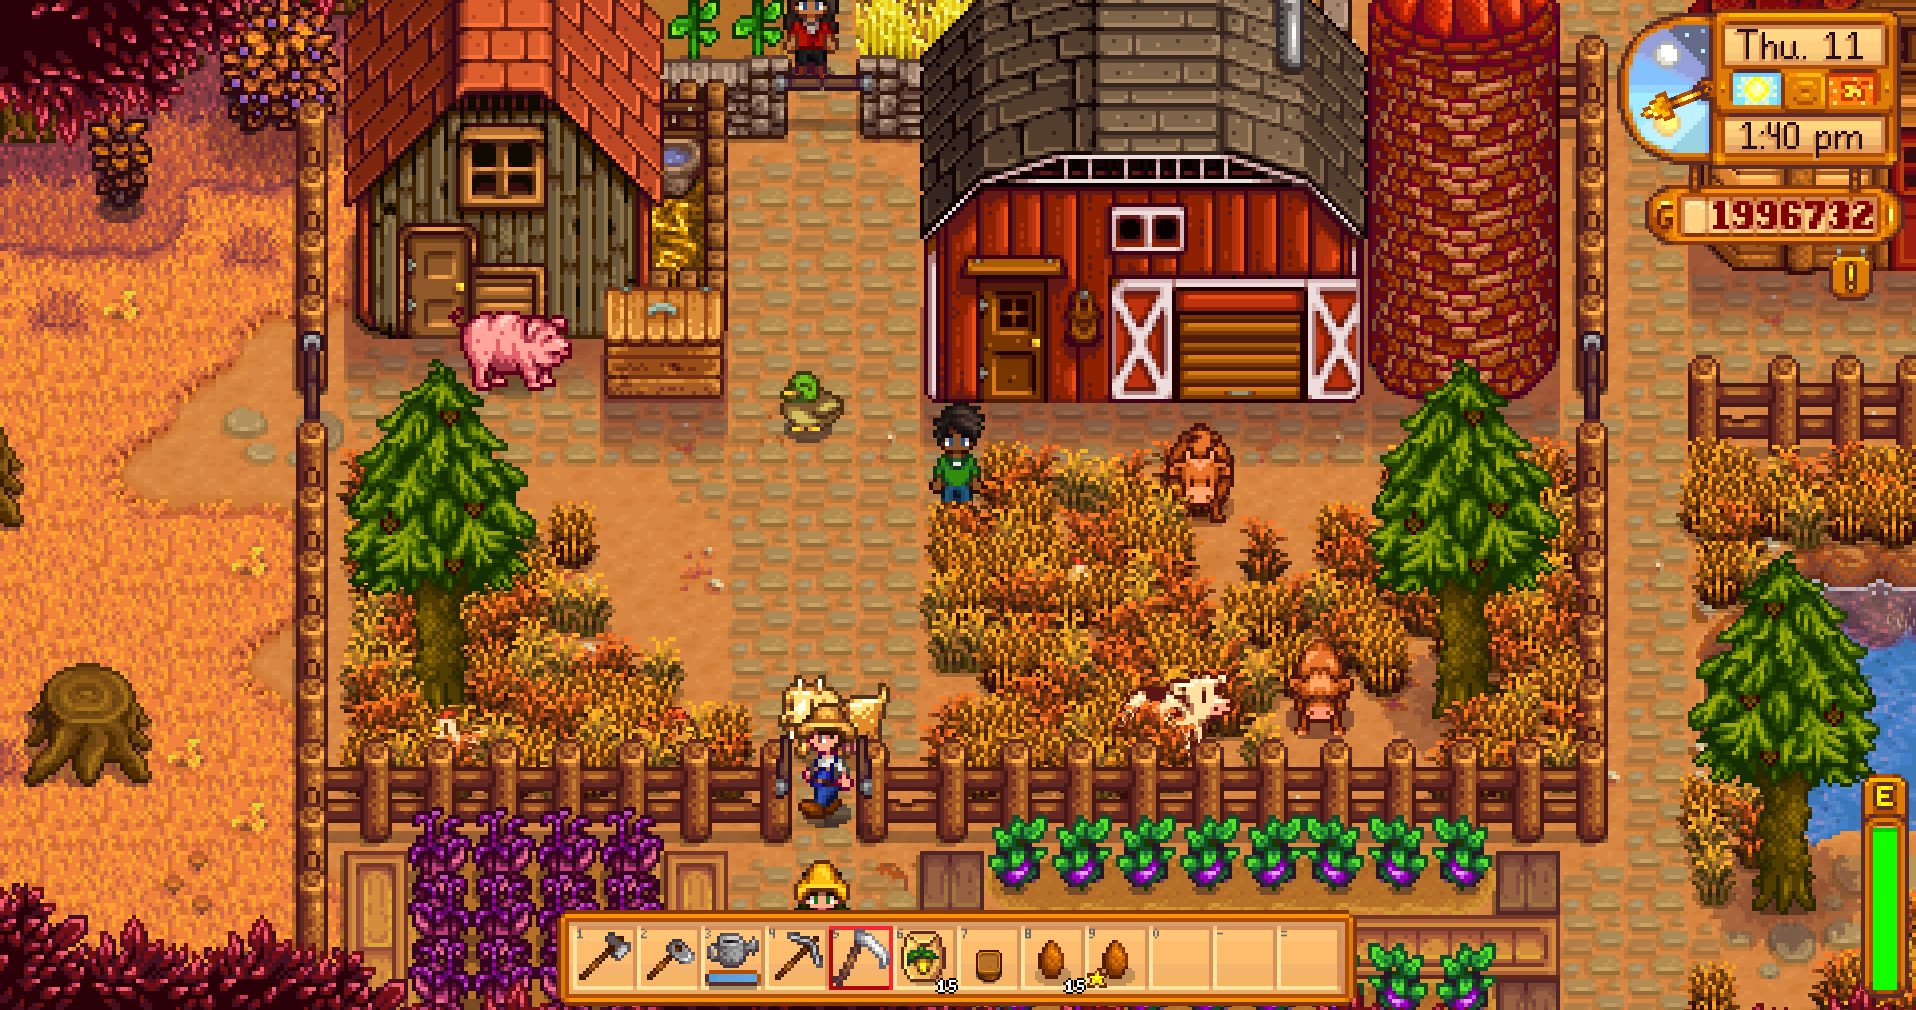 Stardew Valley on PS Vita is here! - Chucklefish